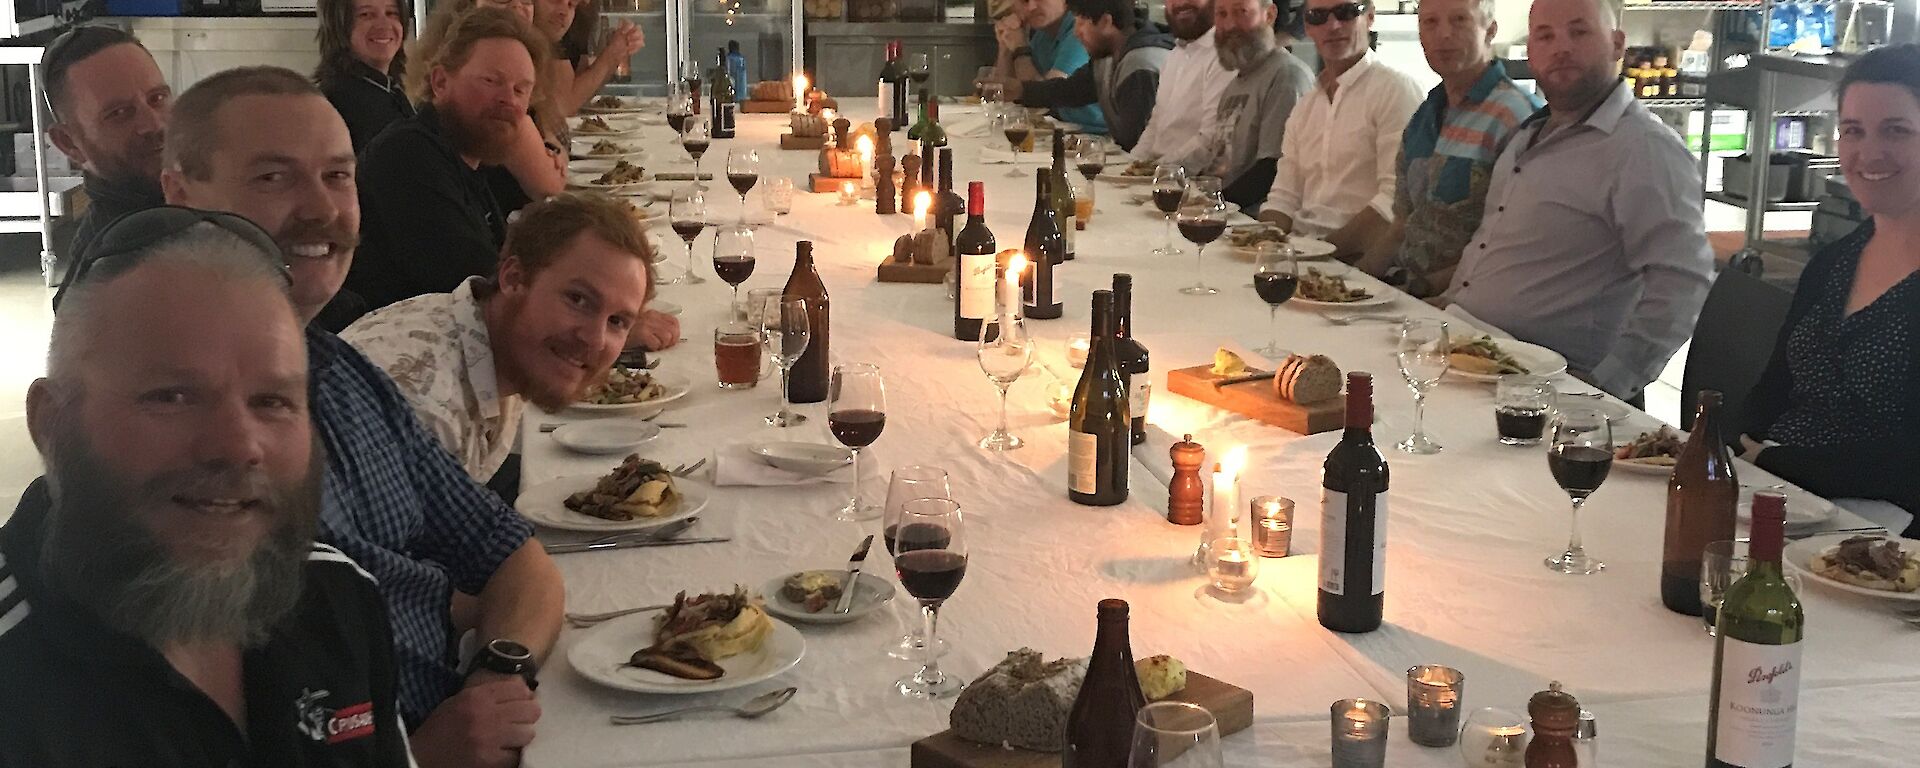 Large long table set with white tableclothes and candles, with expeditioners sitting down either side smiling towards camera.